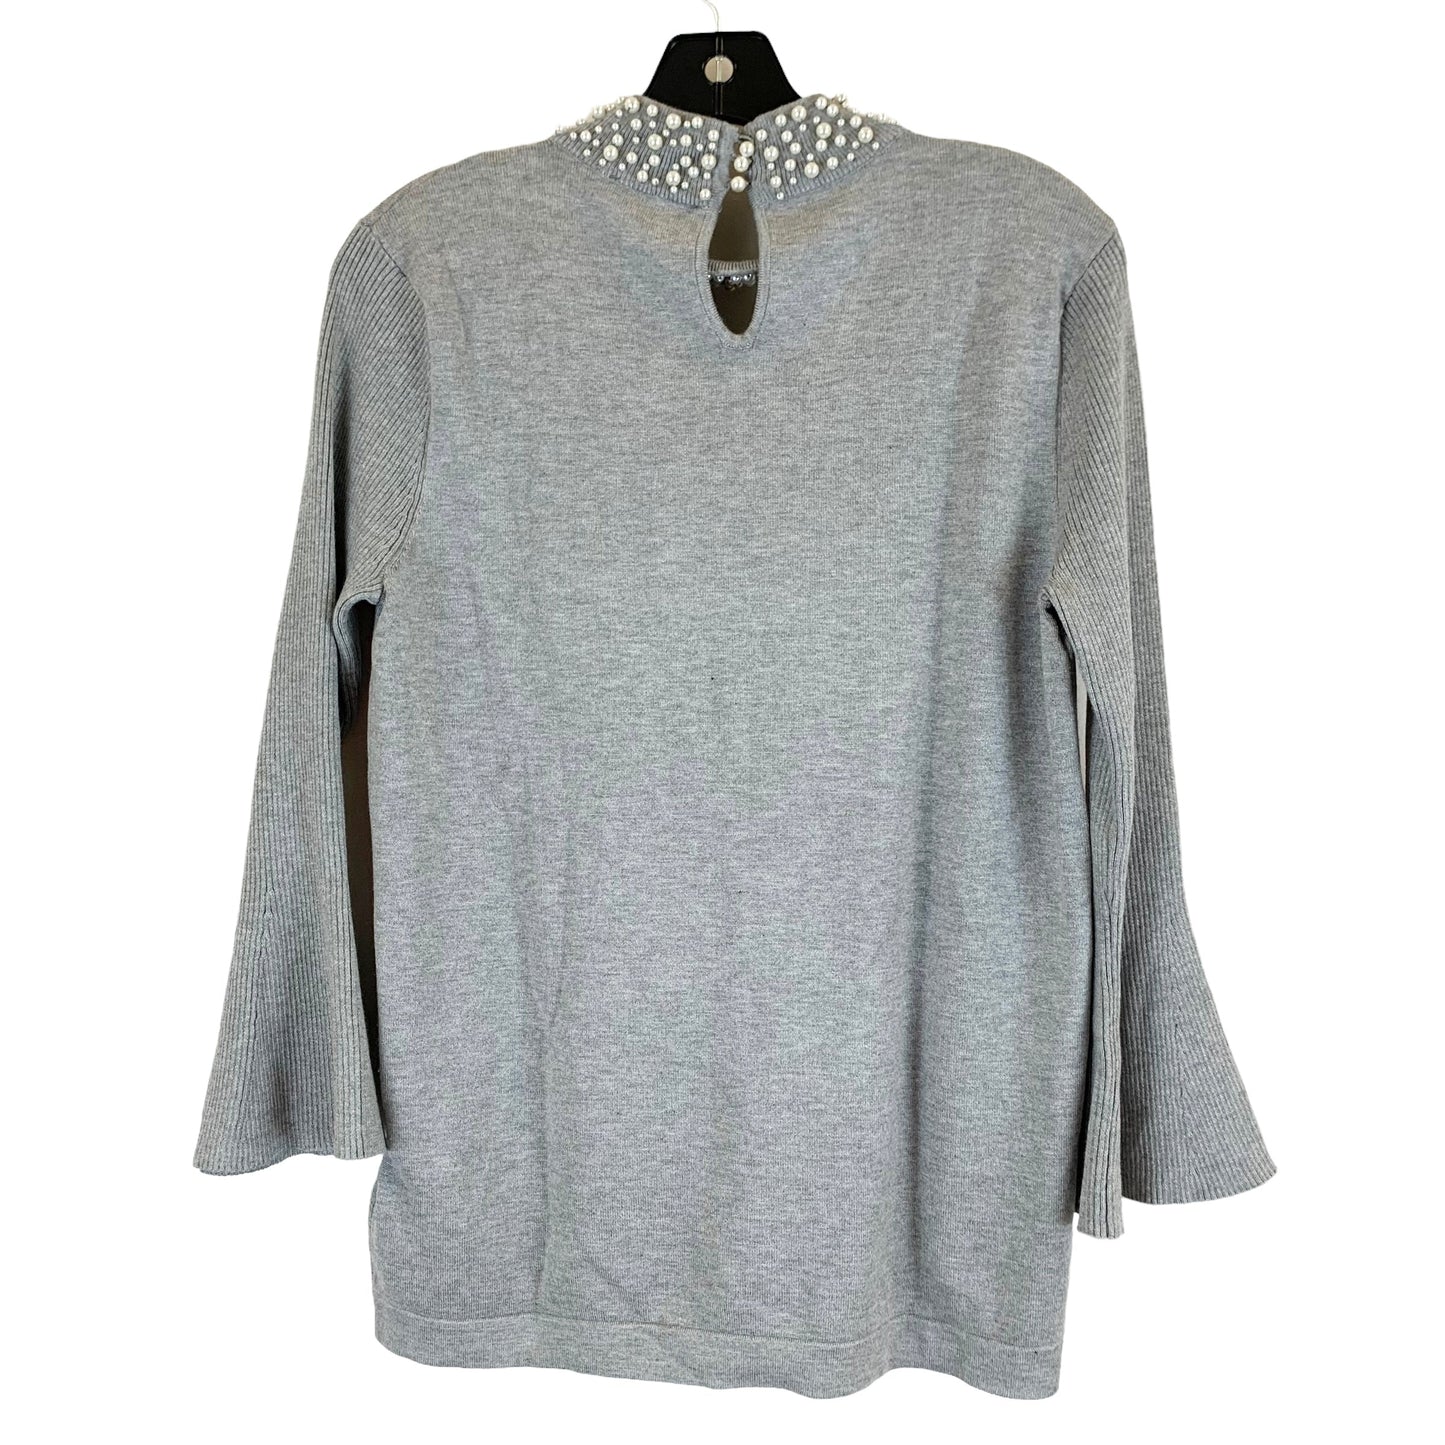 Top Long Sleeve By Karl Lagerfeld  Size: M